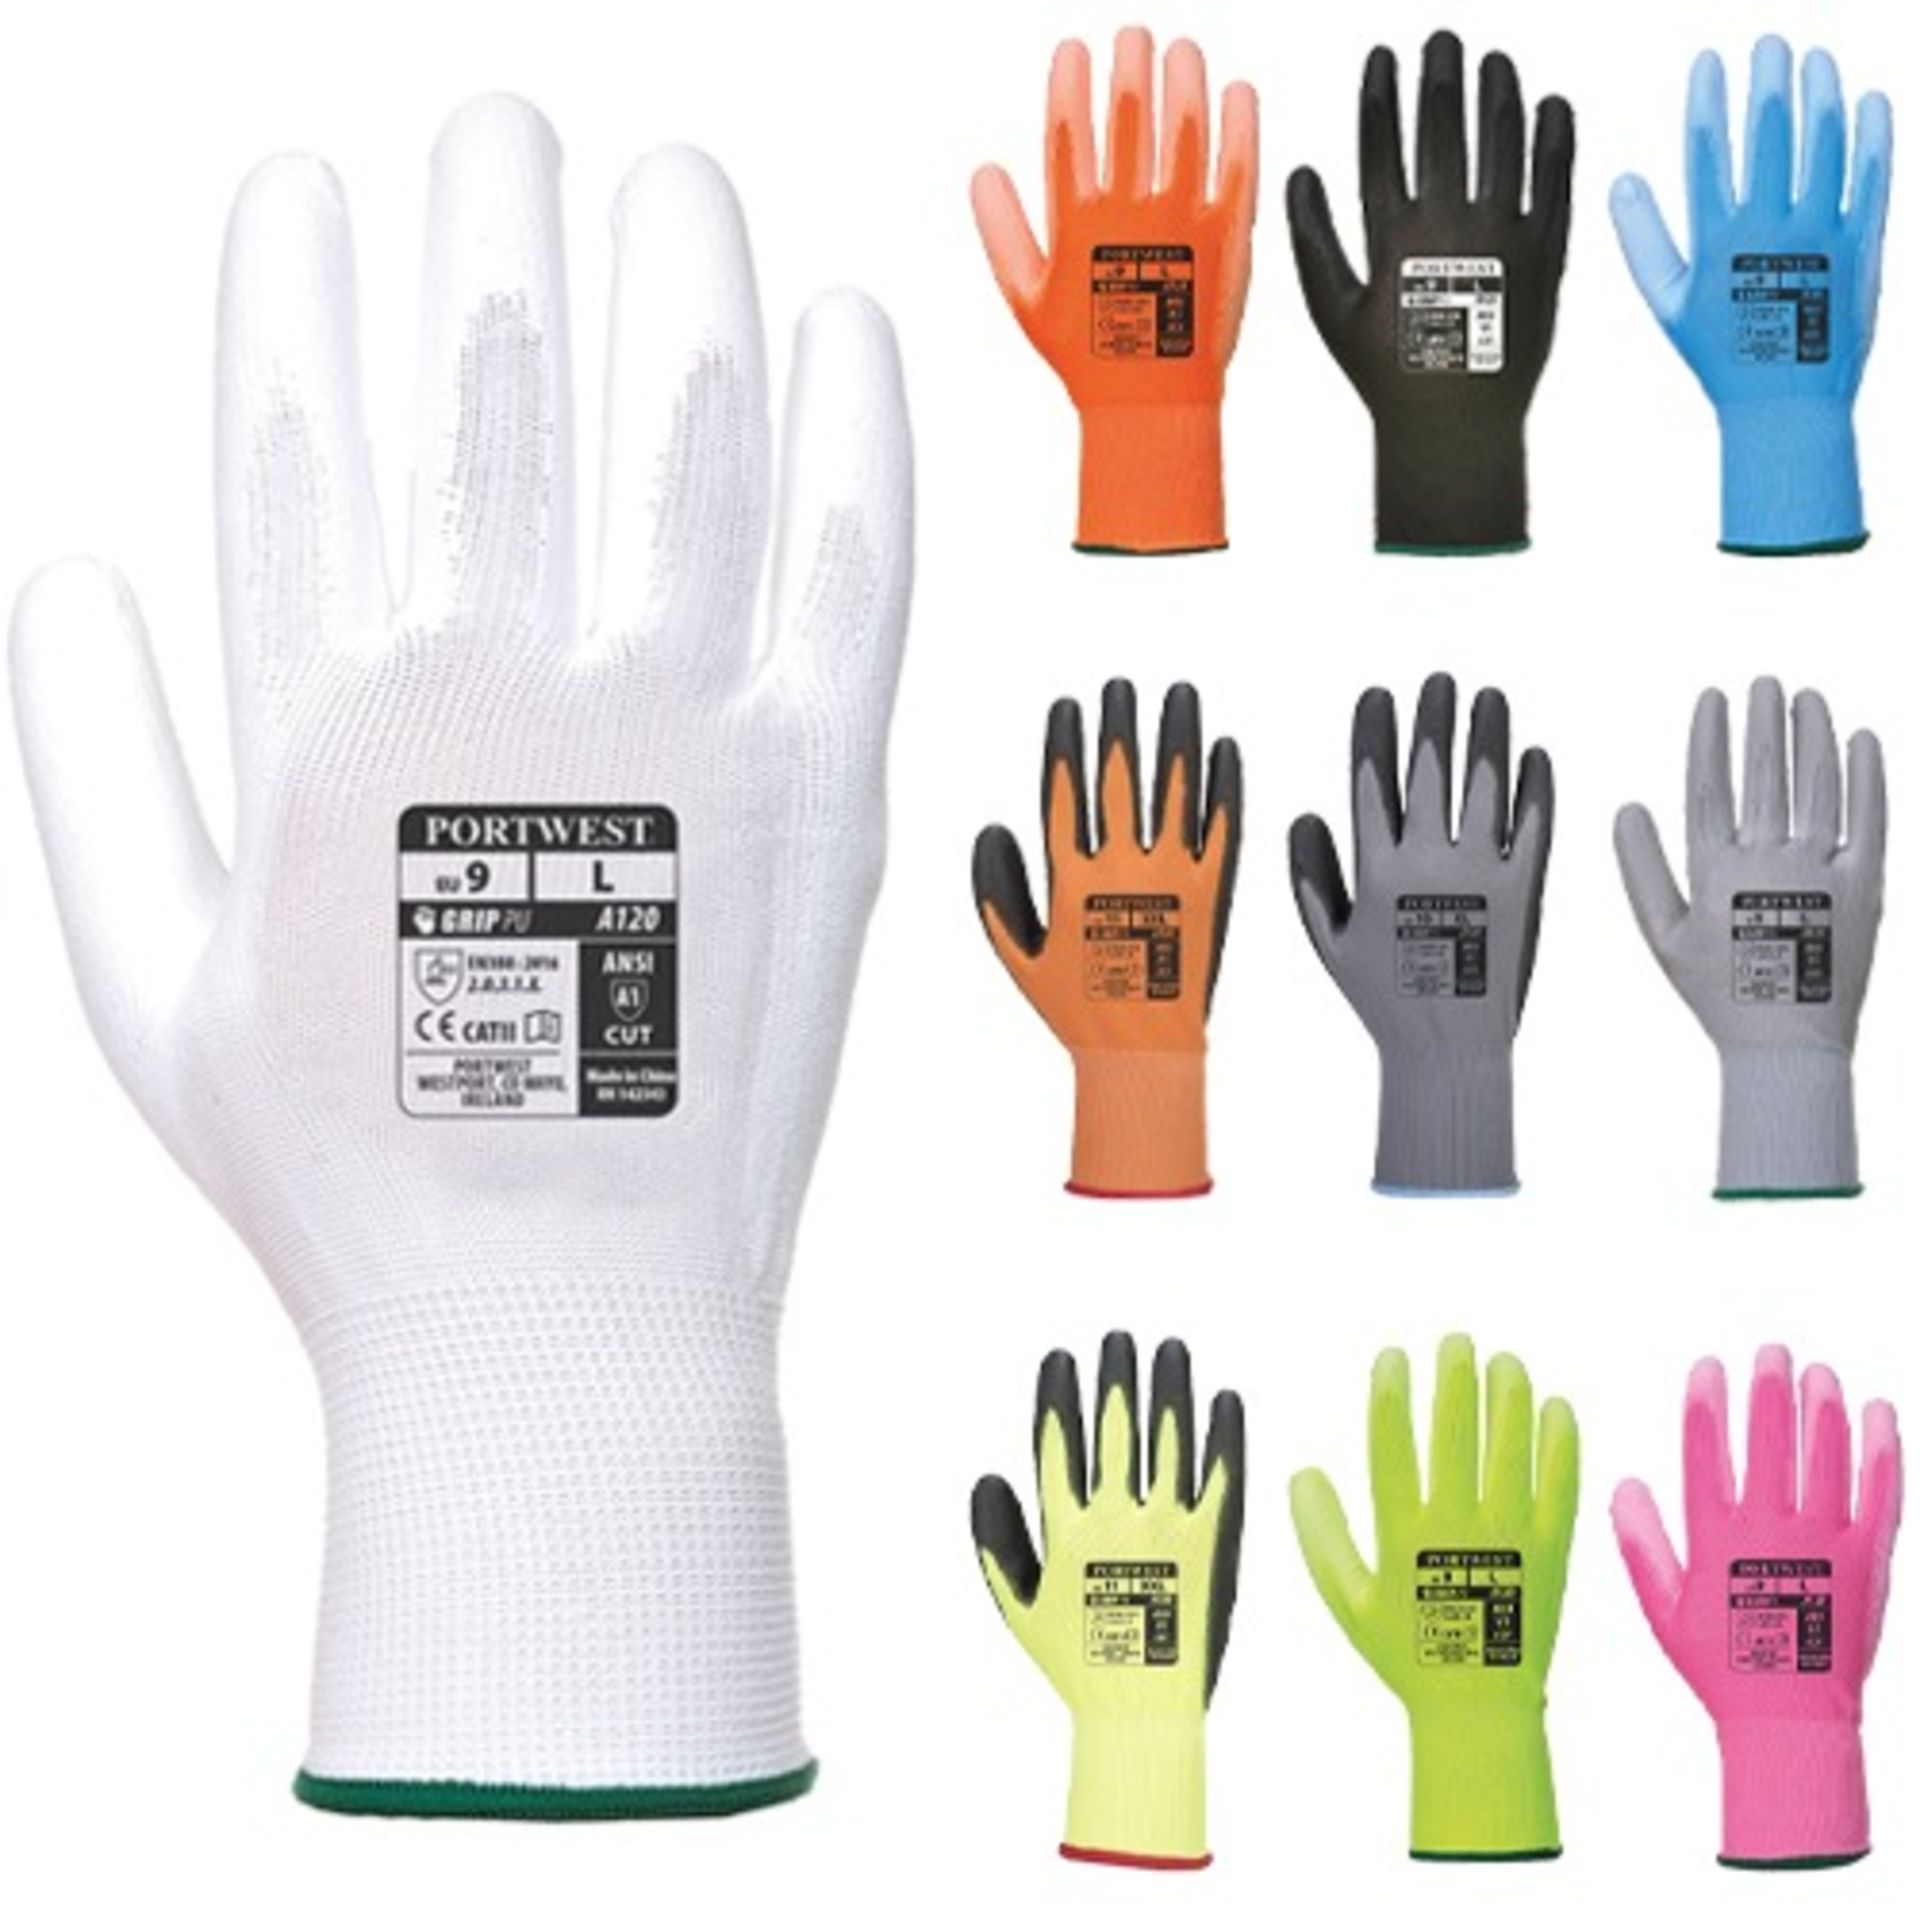 432x Brand New Portwest VA120 Grey pairs of PU Palm Gloves - XS RRP £1.09 Each (R40)